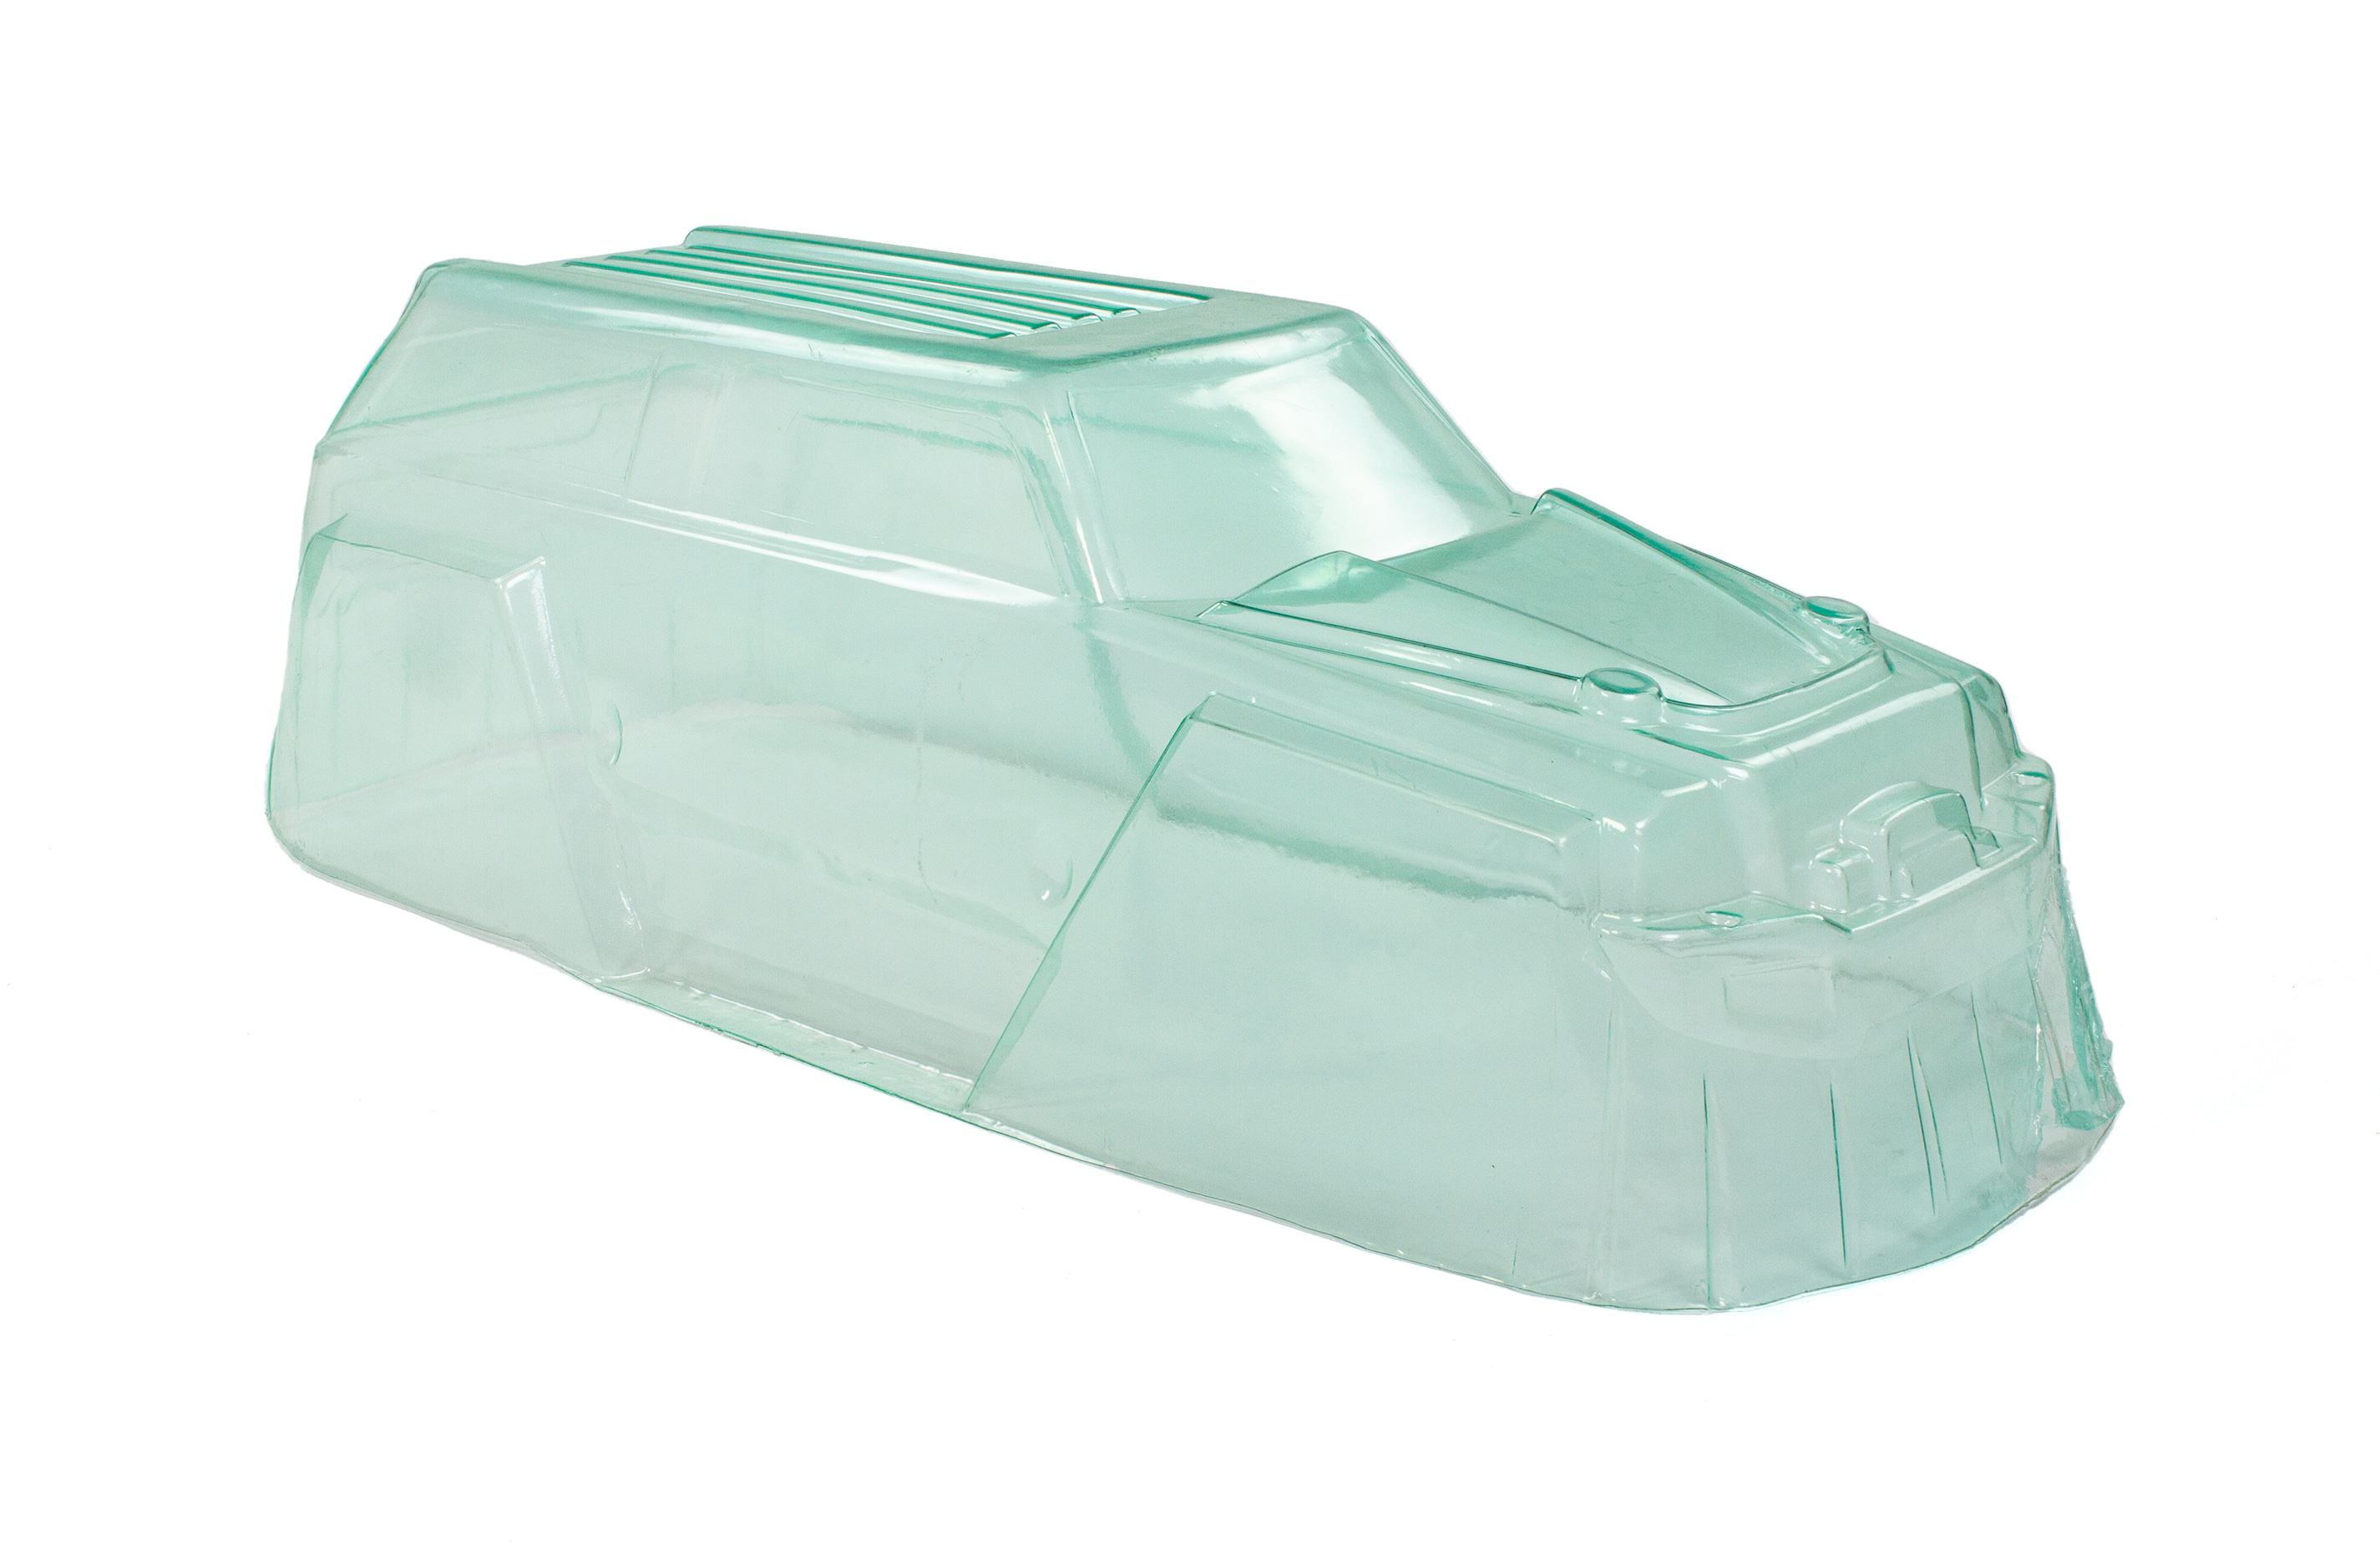 Monster Truck Body shell for Carson and FG models, clear